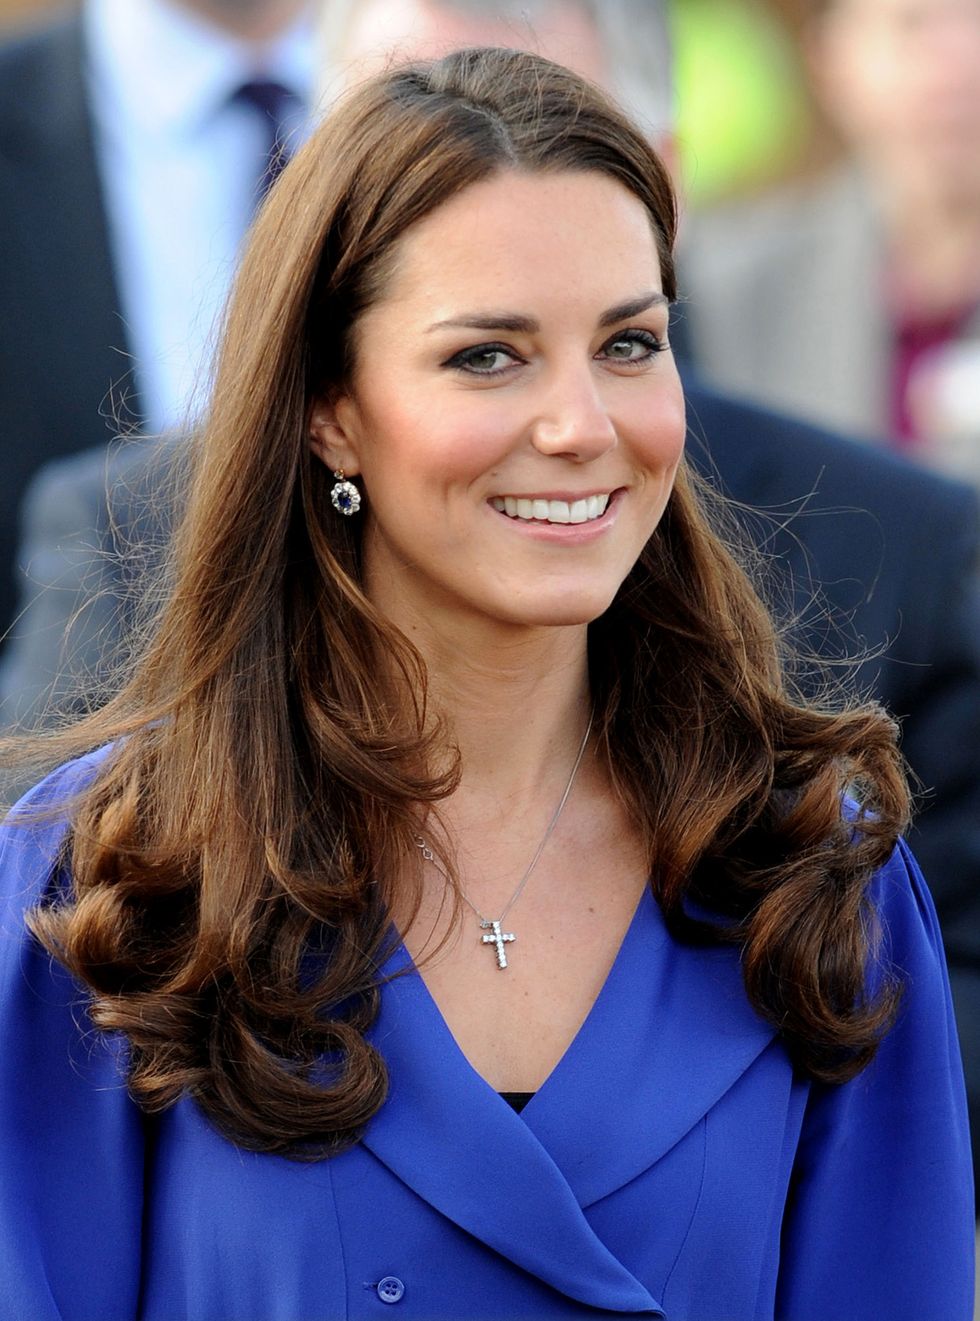 IPSWICH, ENGLAND - MARCH 19: Catherine, Duchess of Cambridge arrives to officially open The Treehouse Children's Hospice on March 19, 2012 in Ipswich, England. (Photo by Samir Hussein/WireImage)